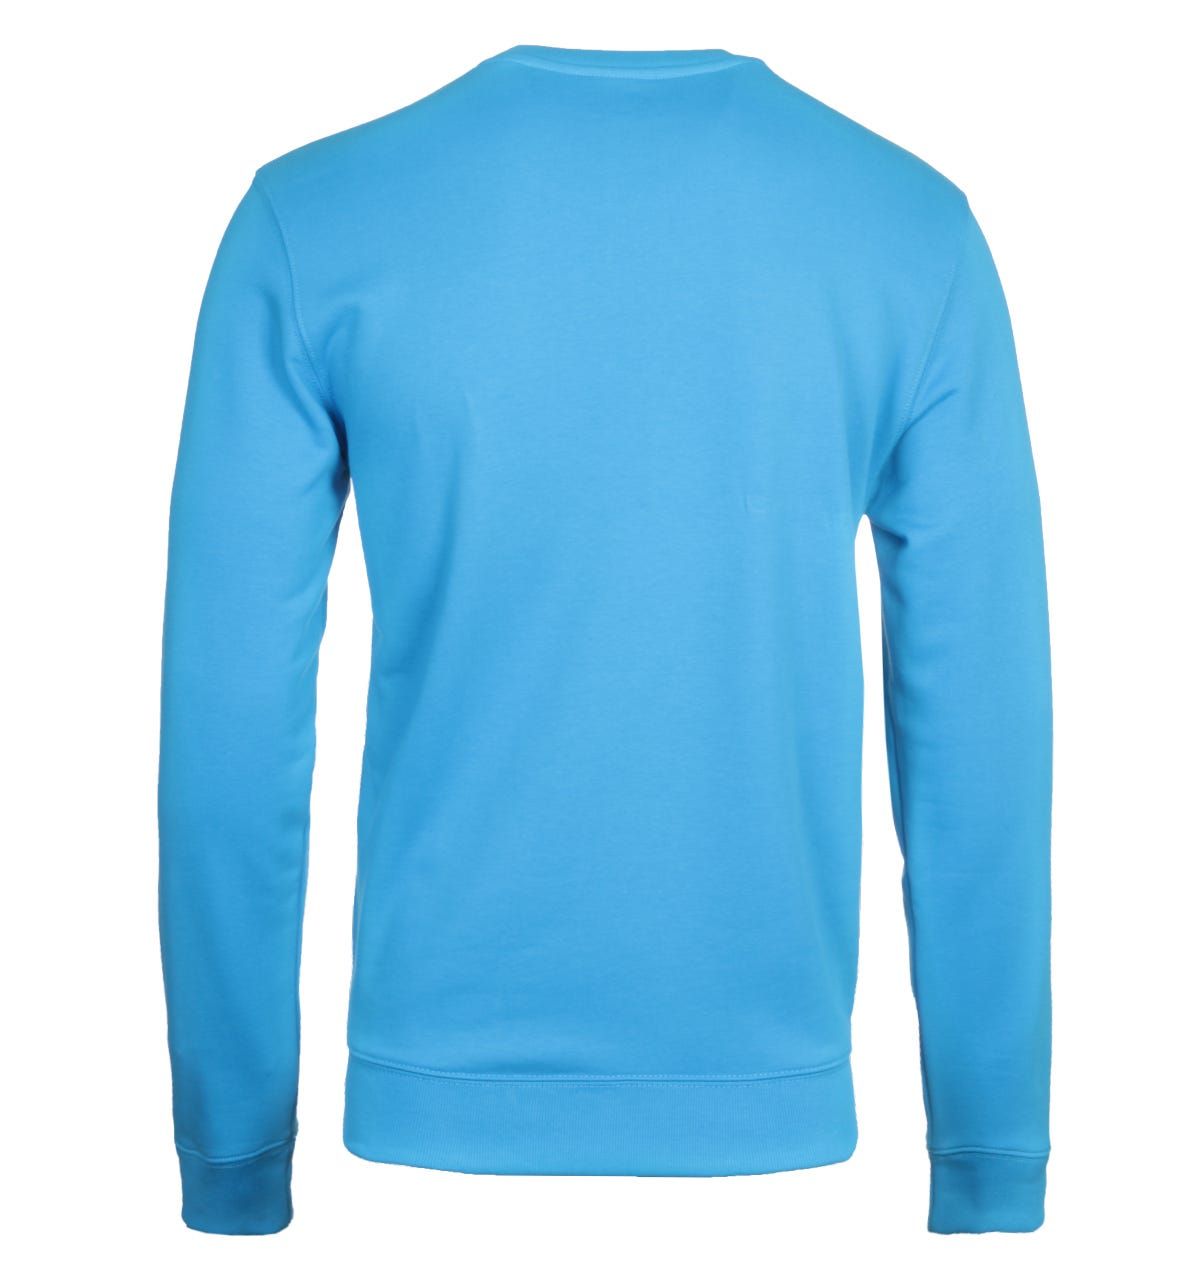 <p>A pique cotton composition crafted by Lacoste. The Lacoste Homme Blue Sweatshirt is fitted with a crew neck collar line and ribbed trims for a lightweight feeling of comfort. The classic silhouette offers versatility, with the design being finished with the Lacoste logo embroidered on the chest.</p><ul><li>Cotton composition</li><li>Crew neck</li><li>Ribbed trims</li><li>Tonal stitching</li><li>Lacoste logo embroidered on chest</li></ul><p>Style & Fit:</p><ul><li>Regular fit</li><li>Fits true to size</li></ul><p>Fabric Composition & Care:</p><ul><li>100% Cotton</li><li>Machine wash</li></ul>